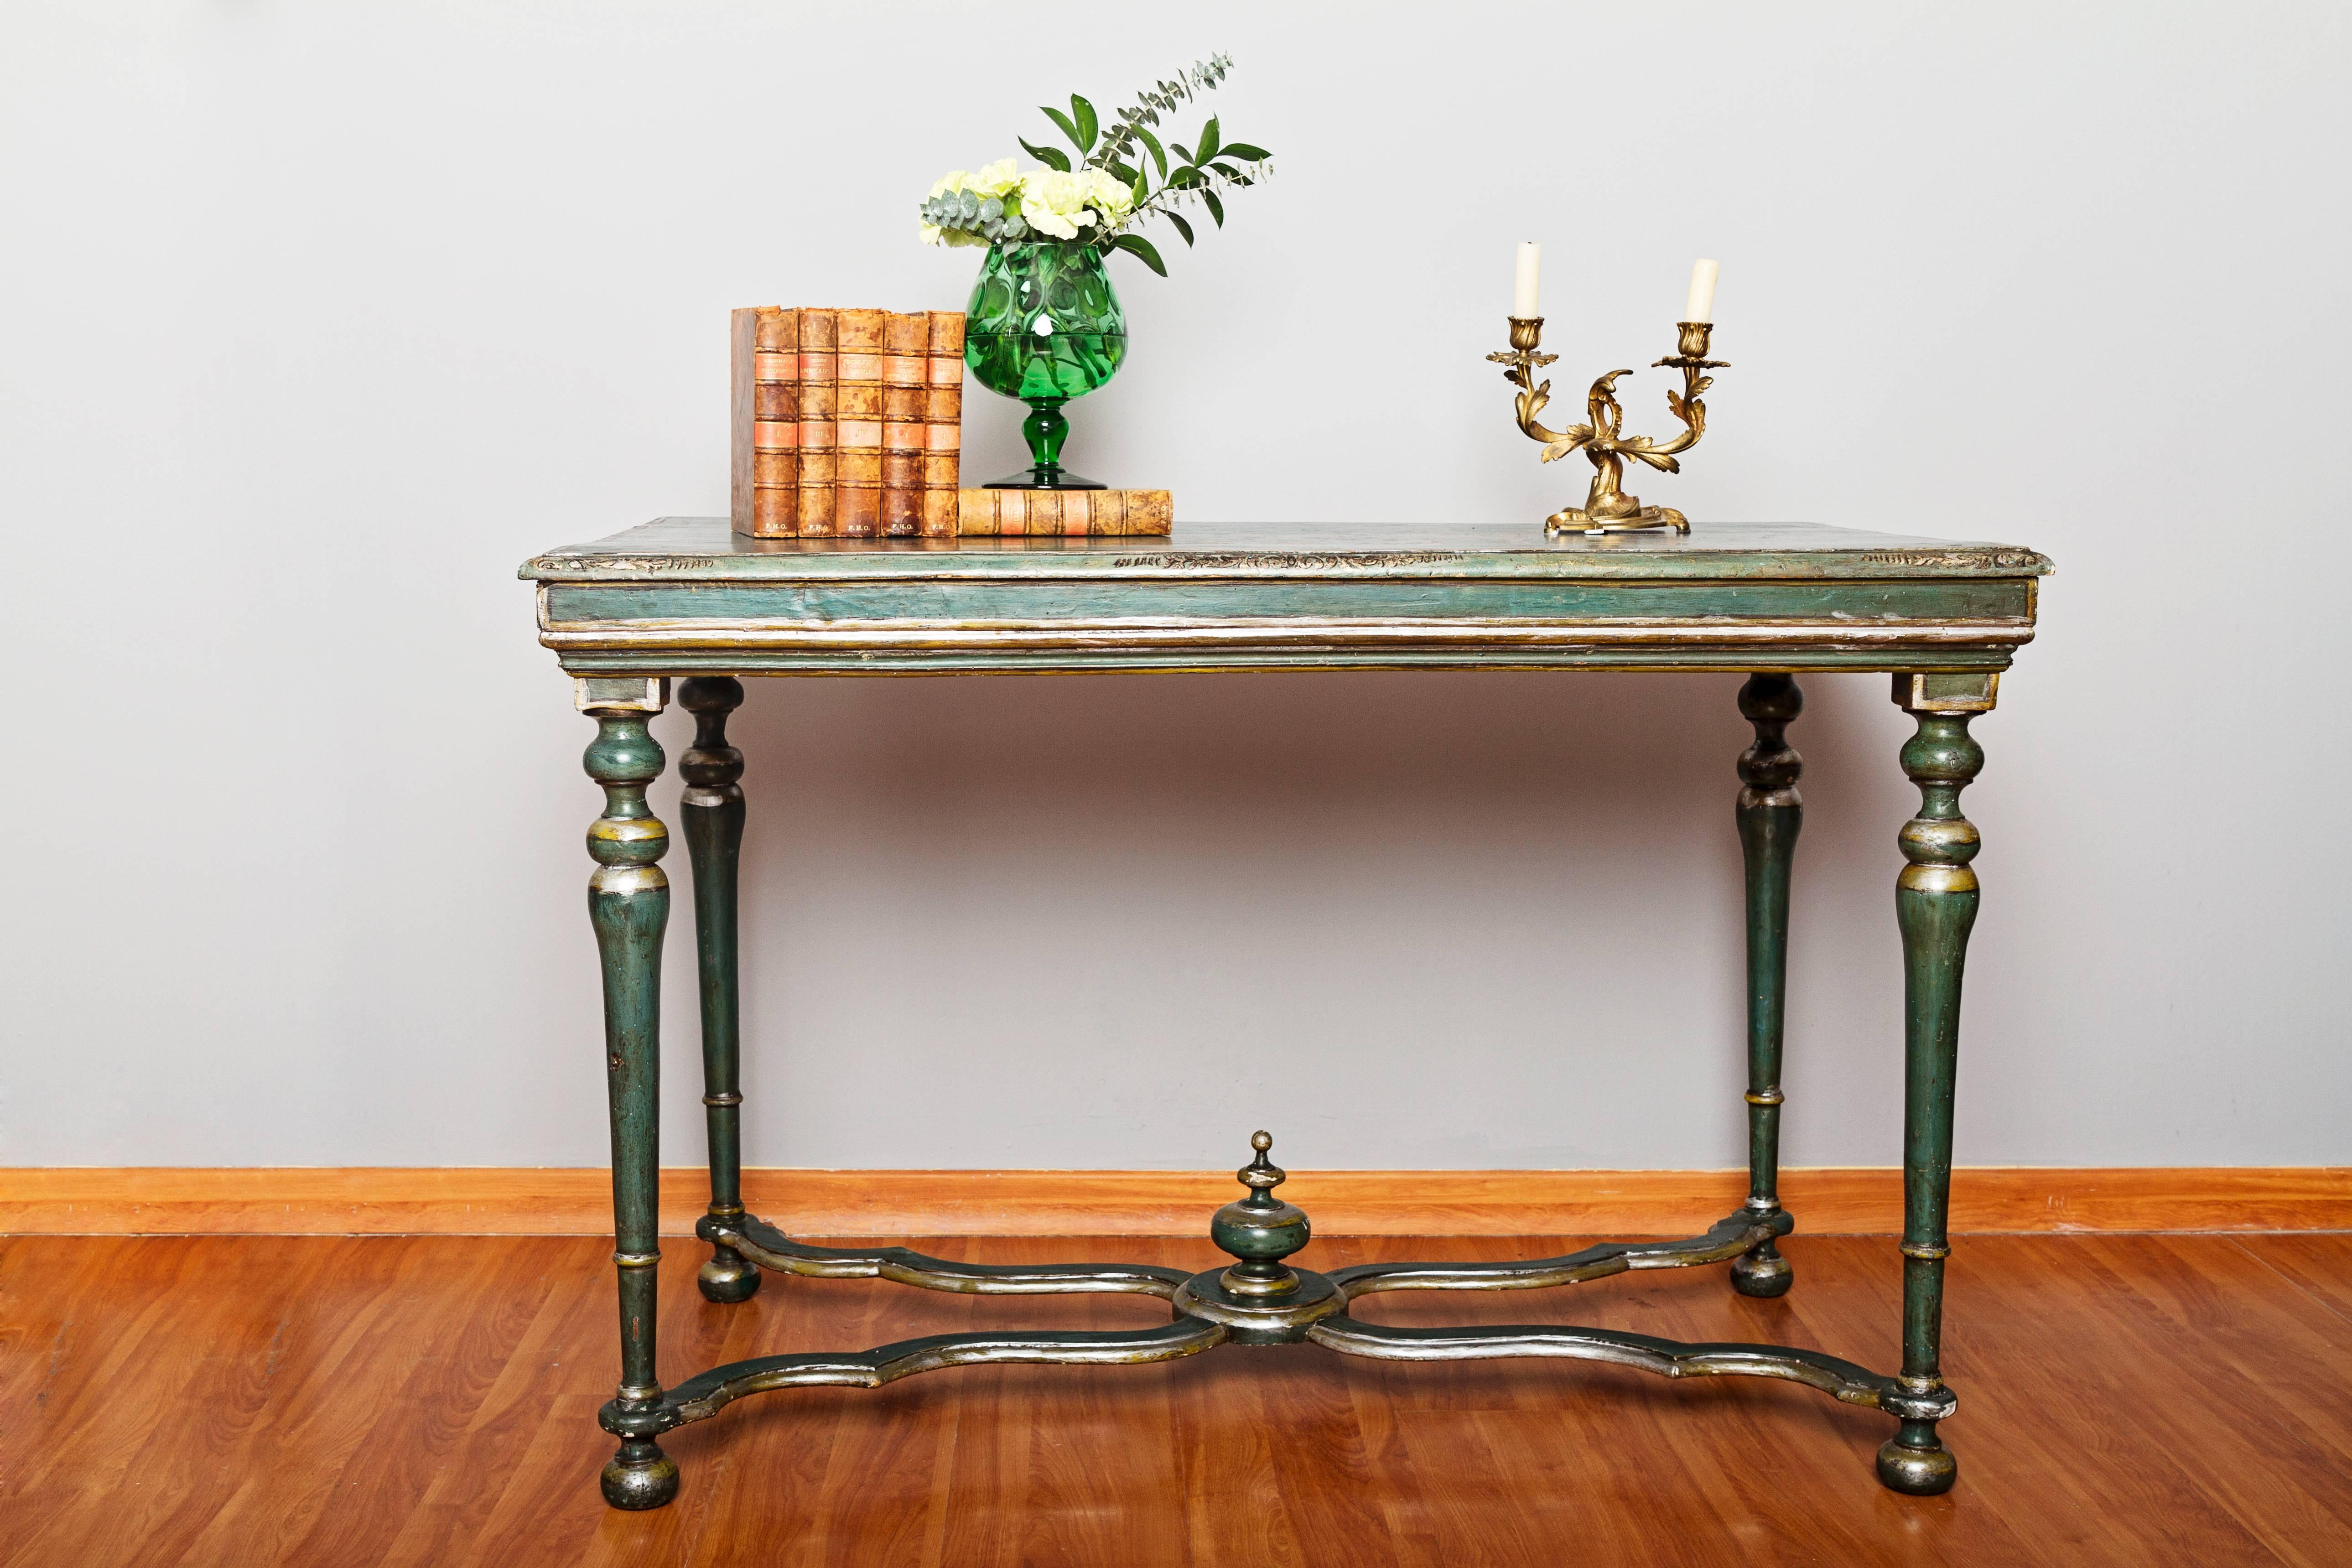 18th century Italian polychromed table with chinoiseries, in it's original green and chinoiseries painted on tabletop.